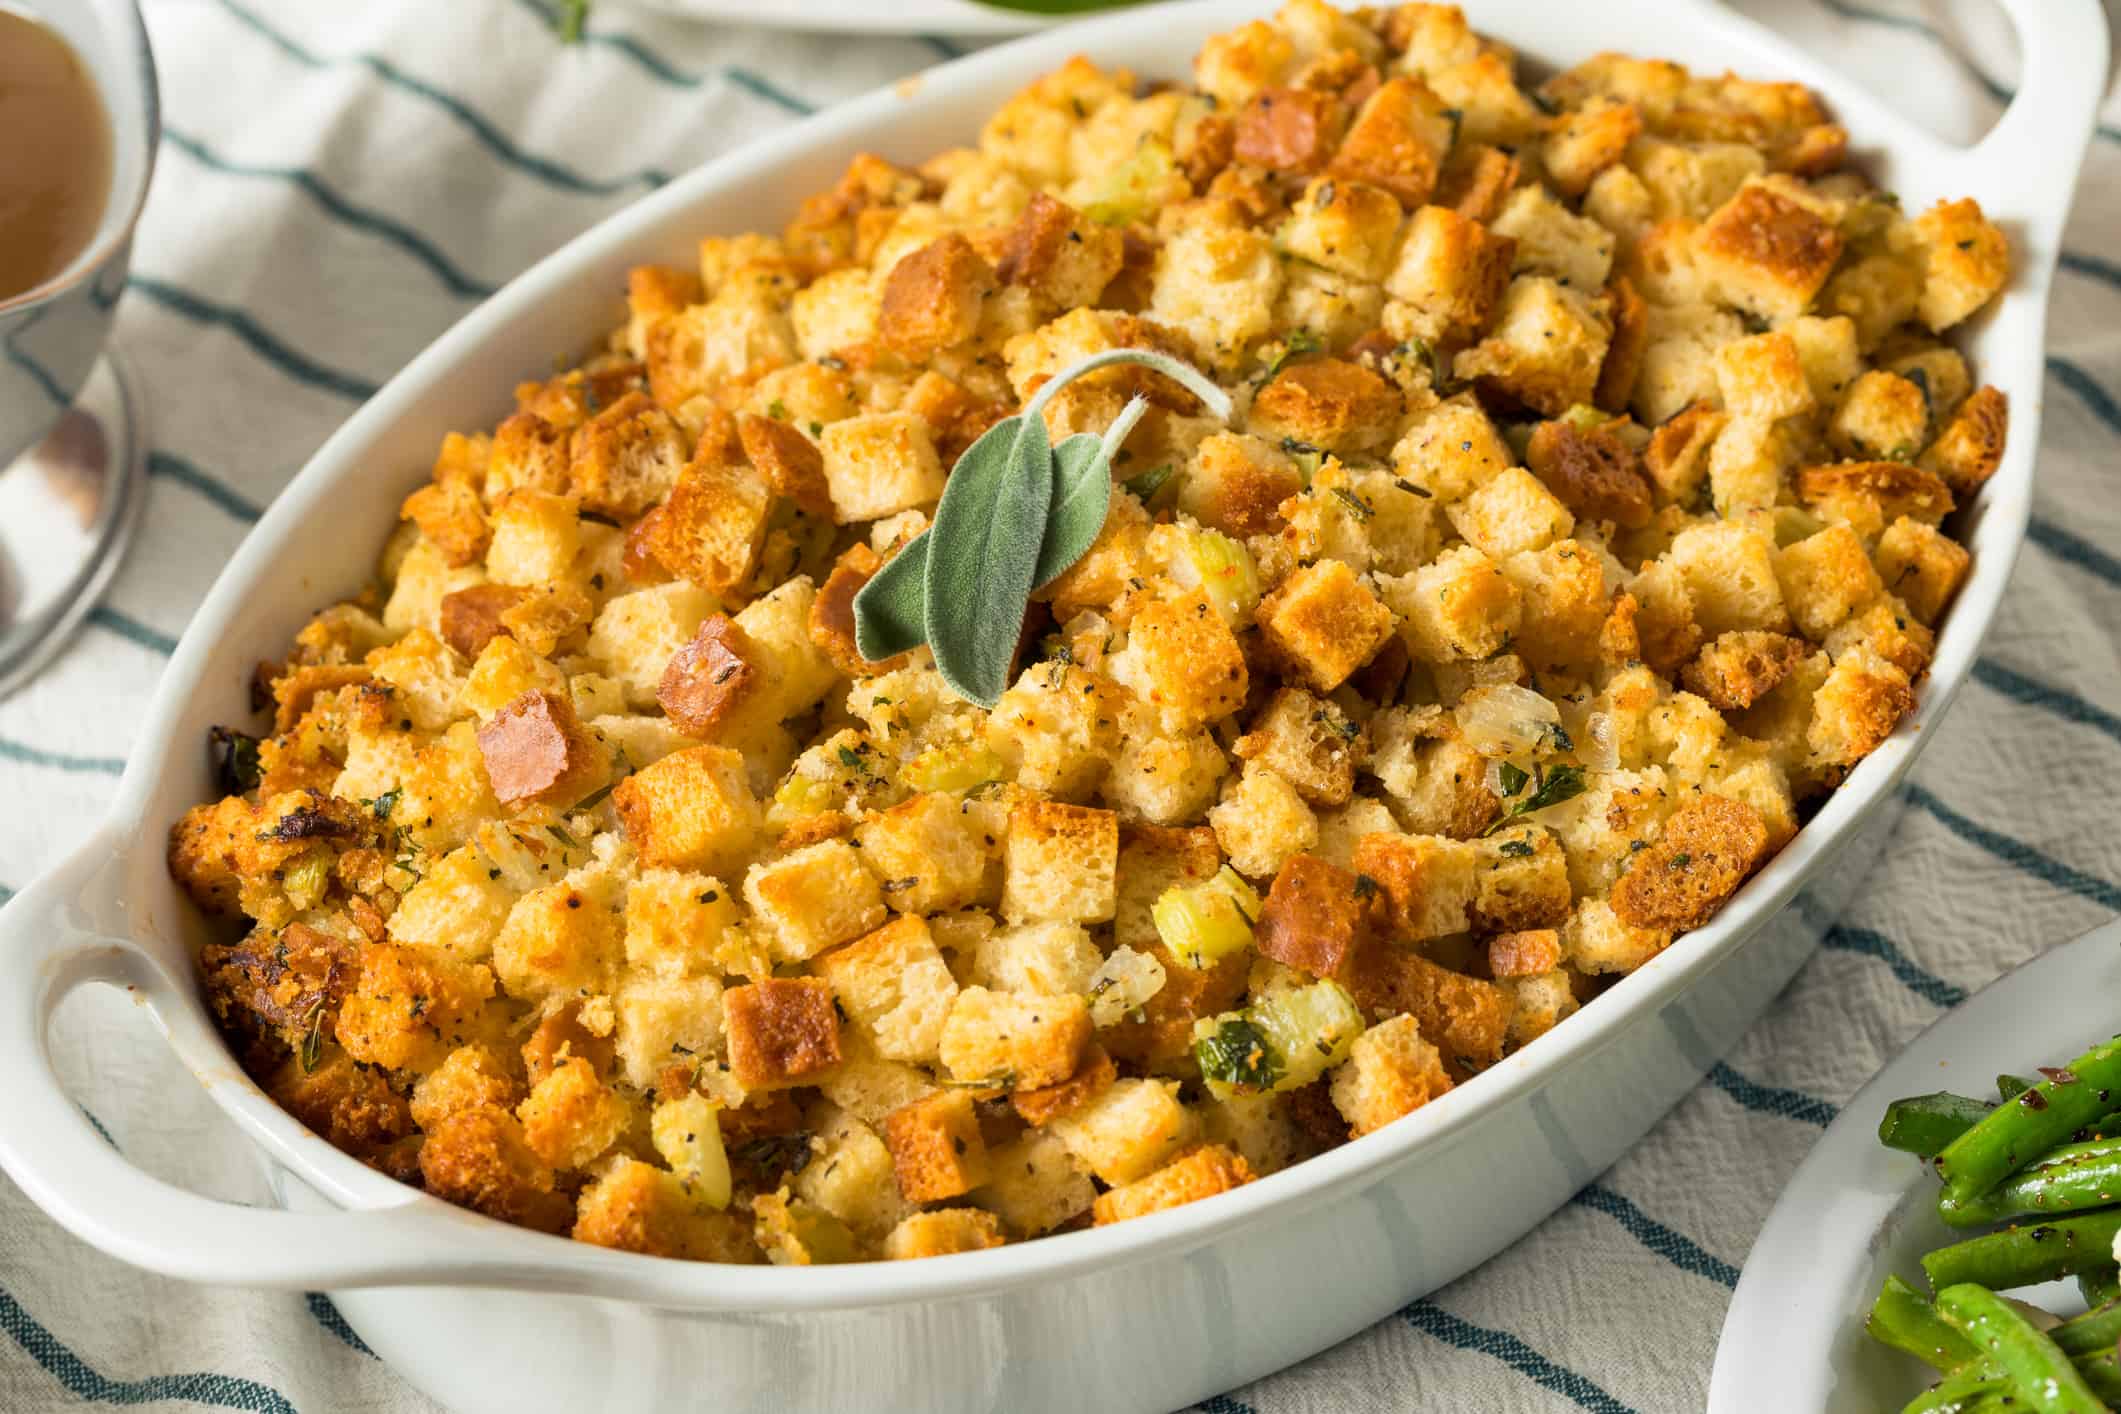 You Have to Try This Delicious Country Bread Stuffing Recipe